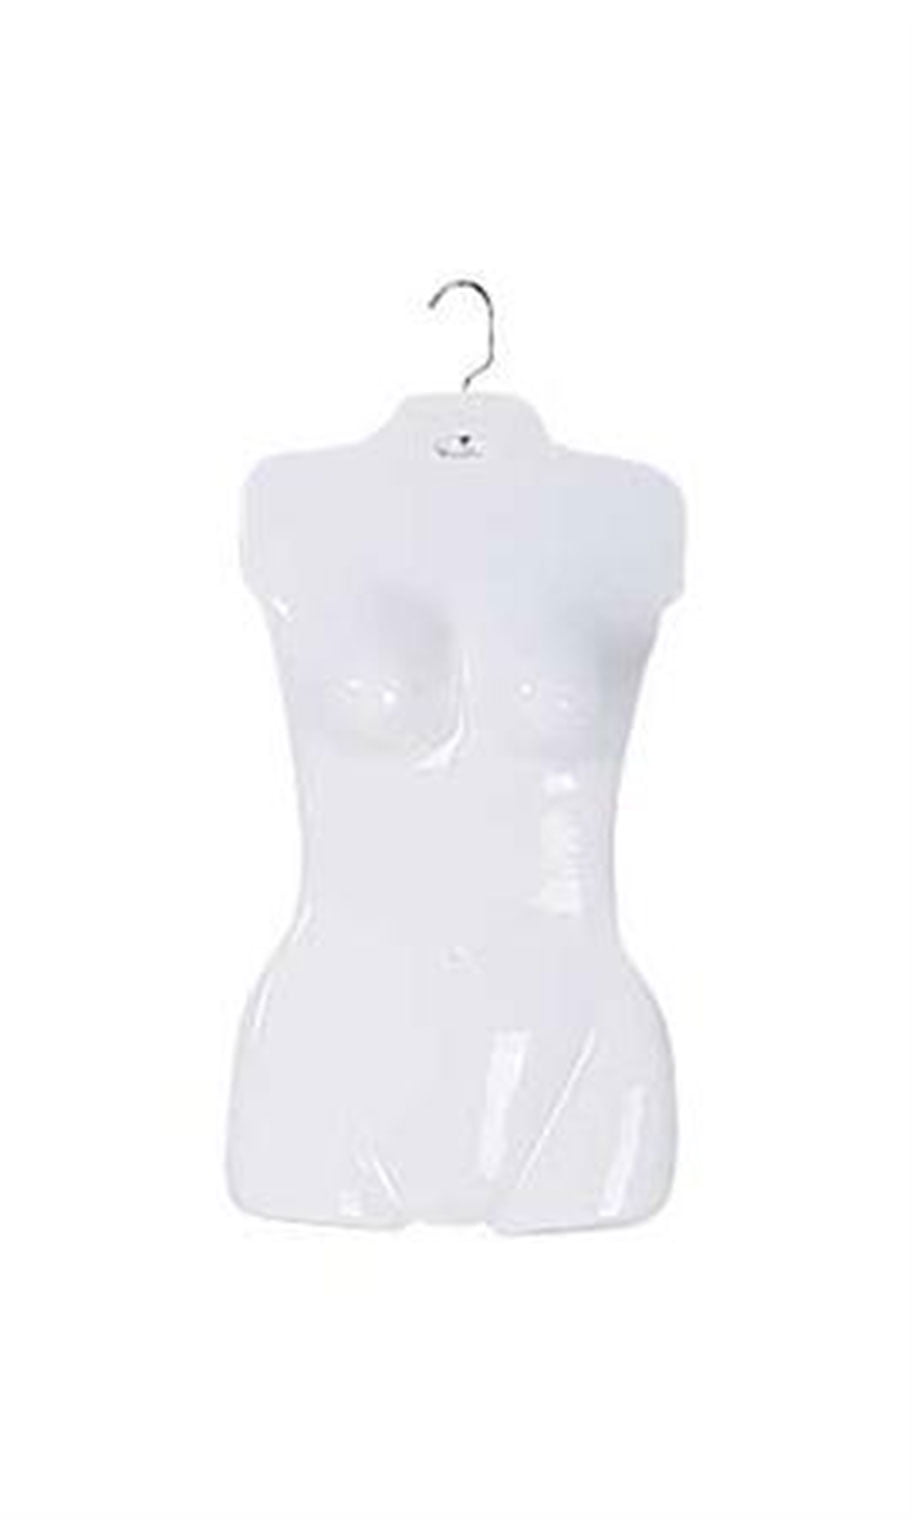 Clothing Display Torso Form Fits 5 to 10 Hanging Female Mannequin Frosted Hollow 